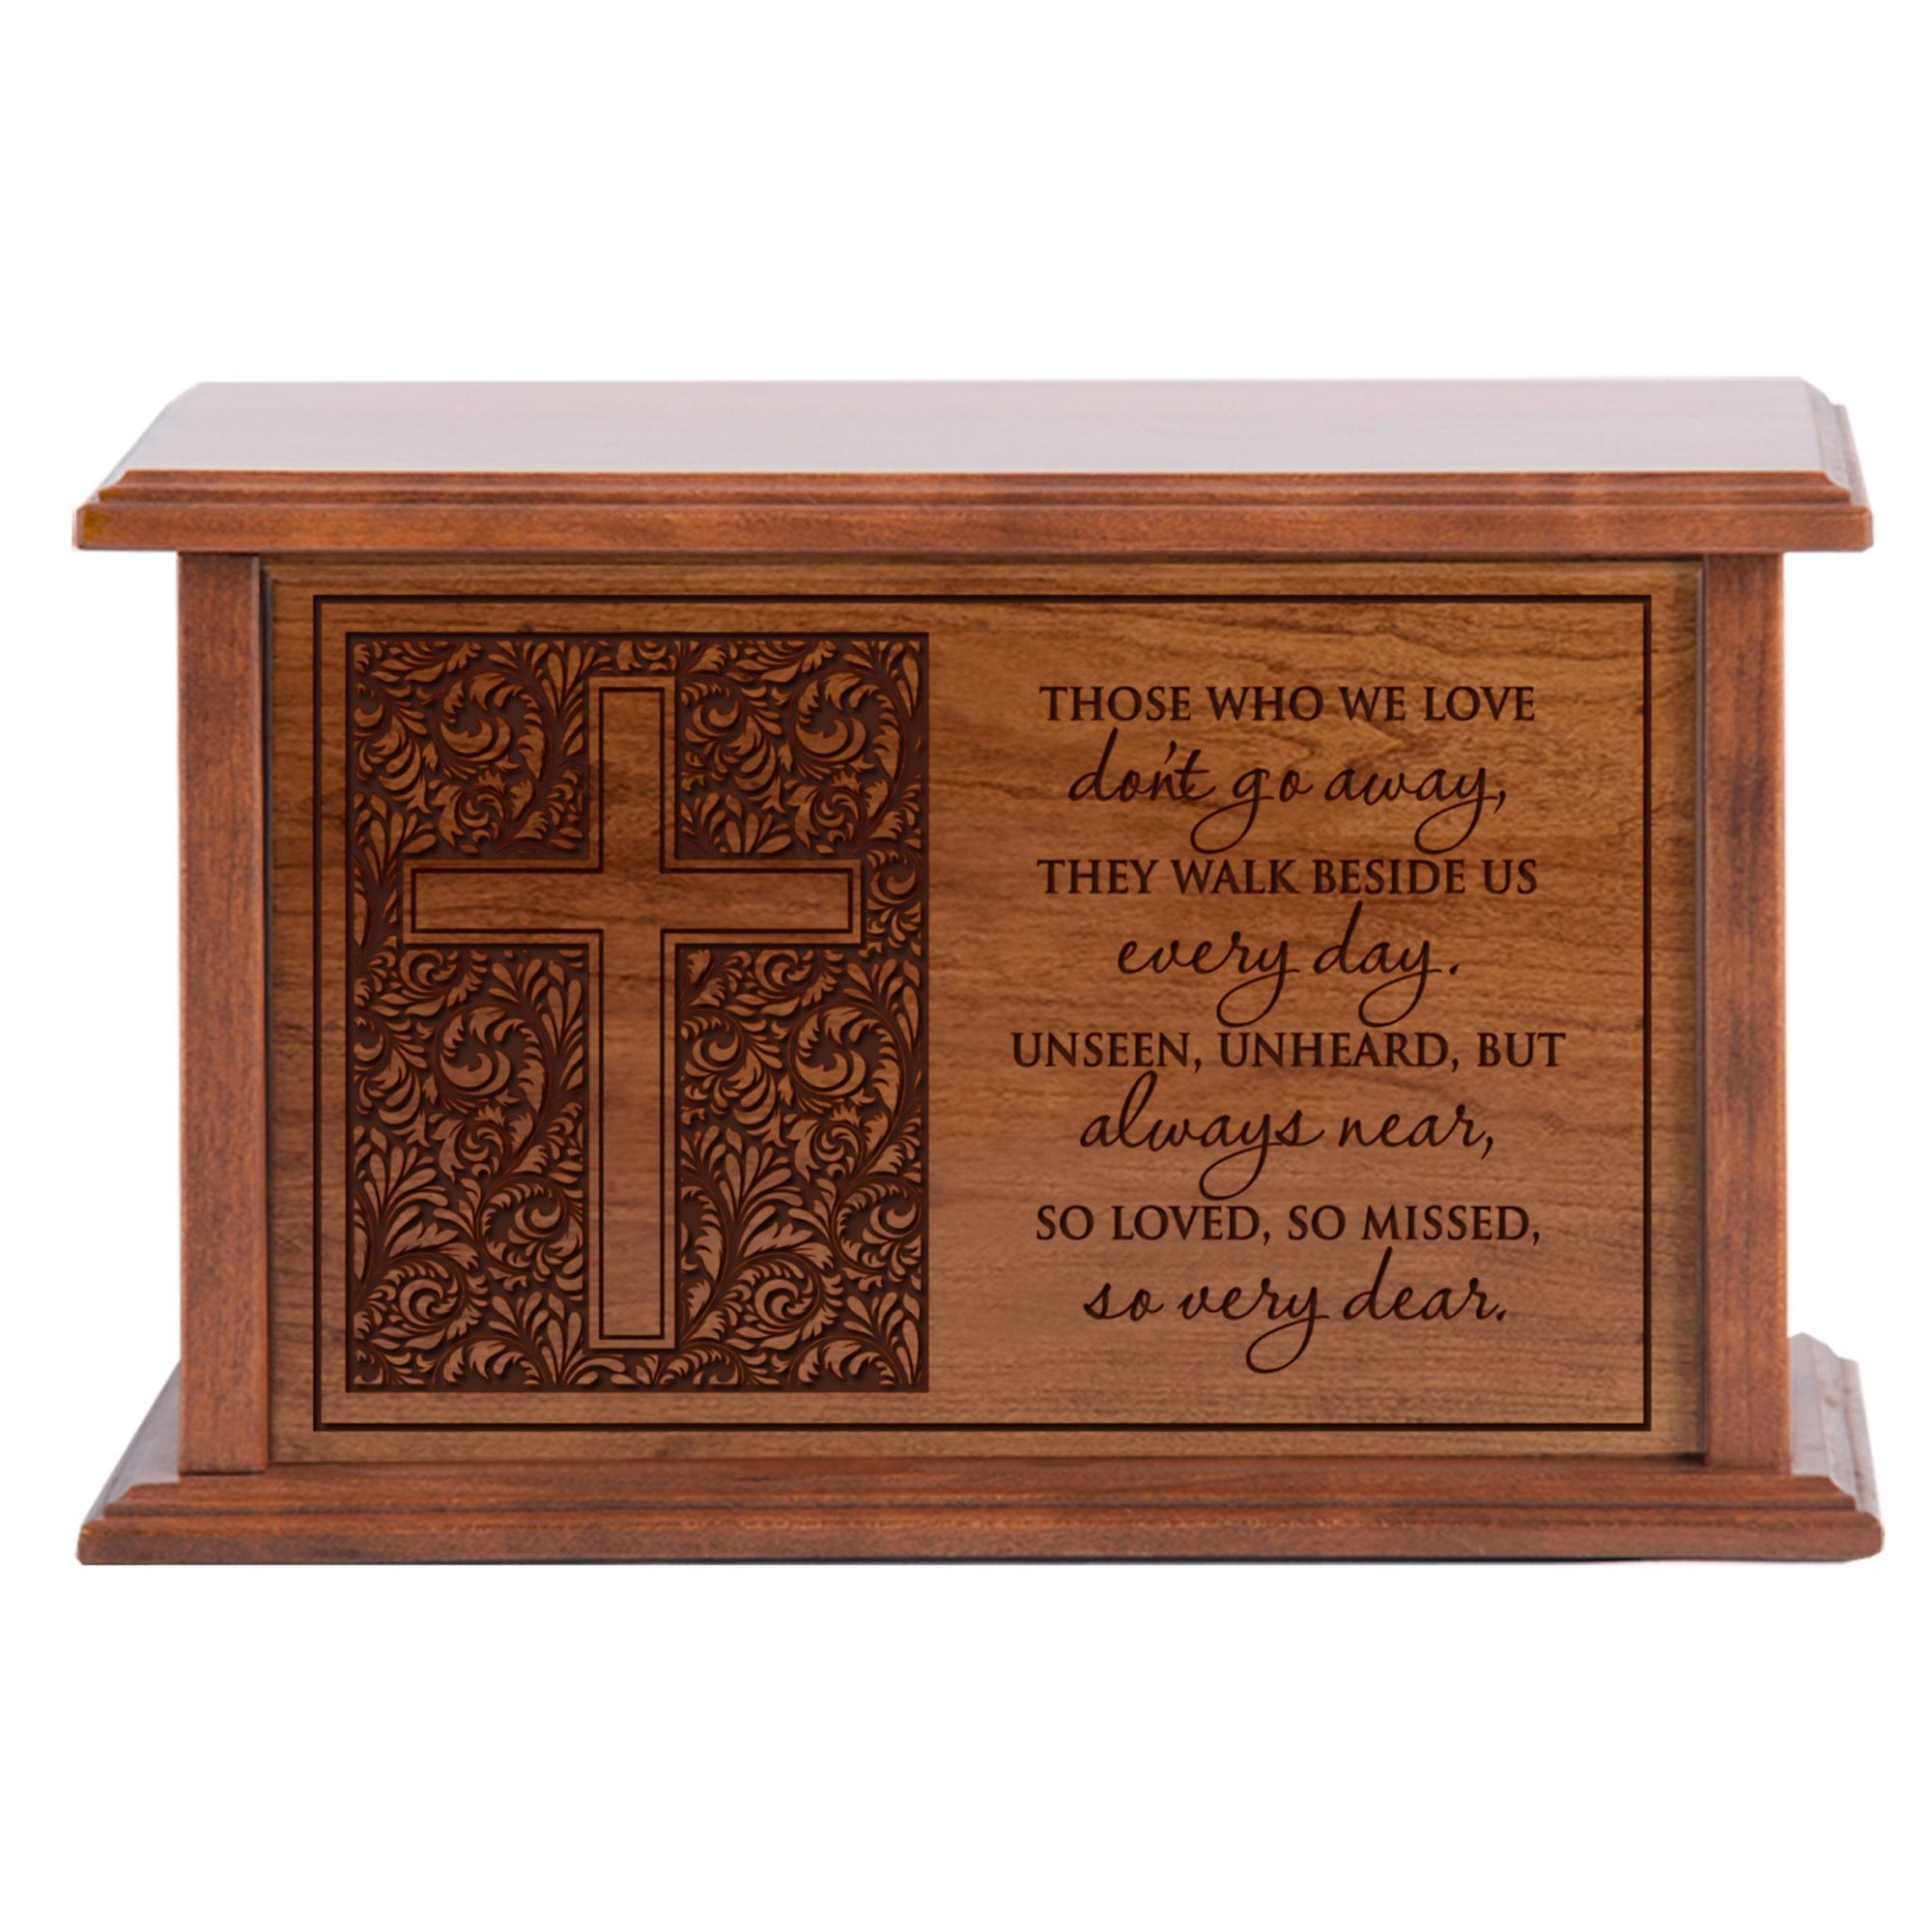 Engraved Cherry Wood Cremation Urn Those Who We Love 10.5x7.5 - LifeSong Milestones